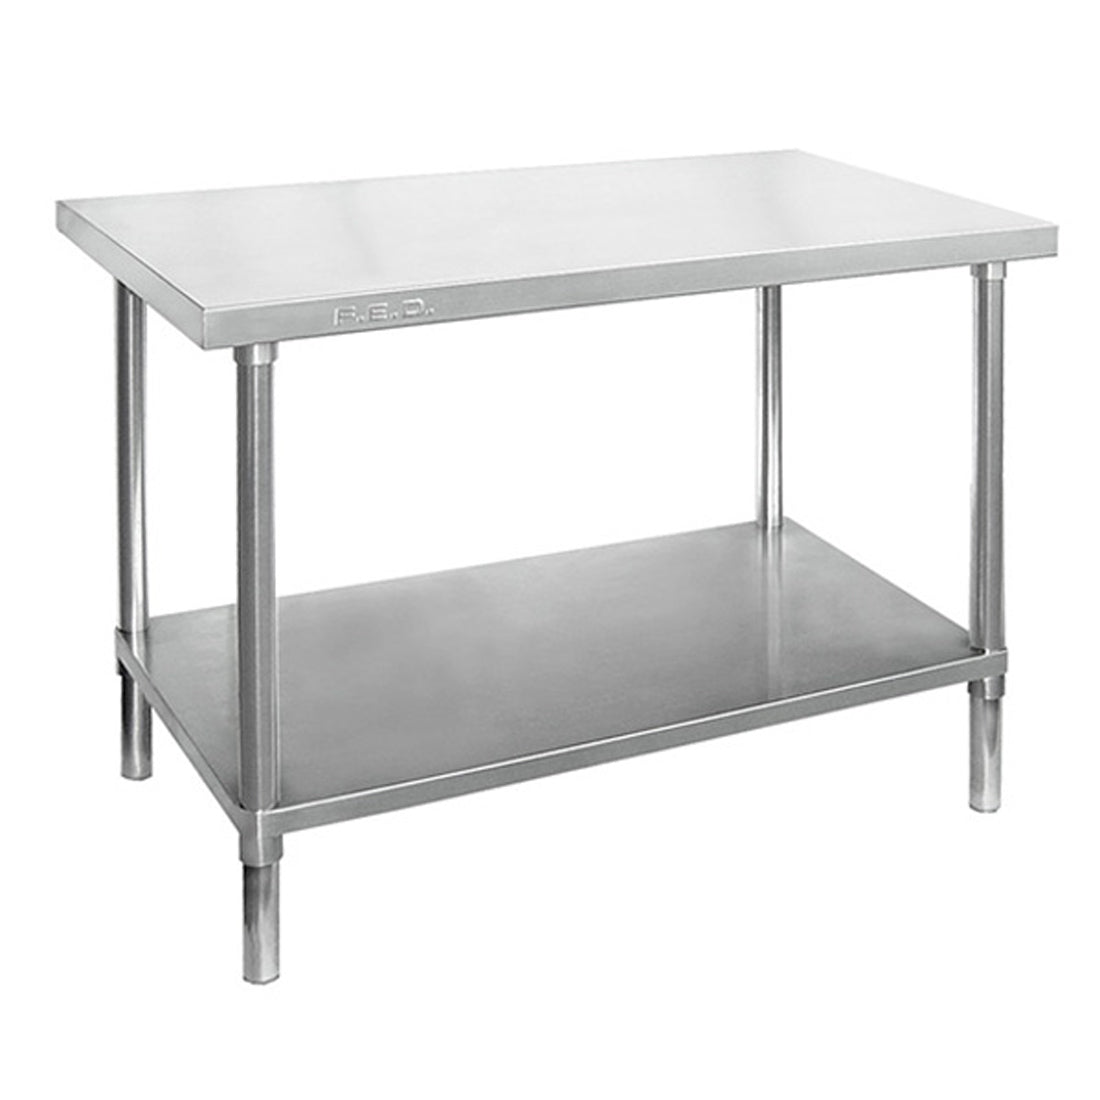 WB7-1500/A Stainless Steel Workbench